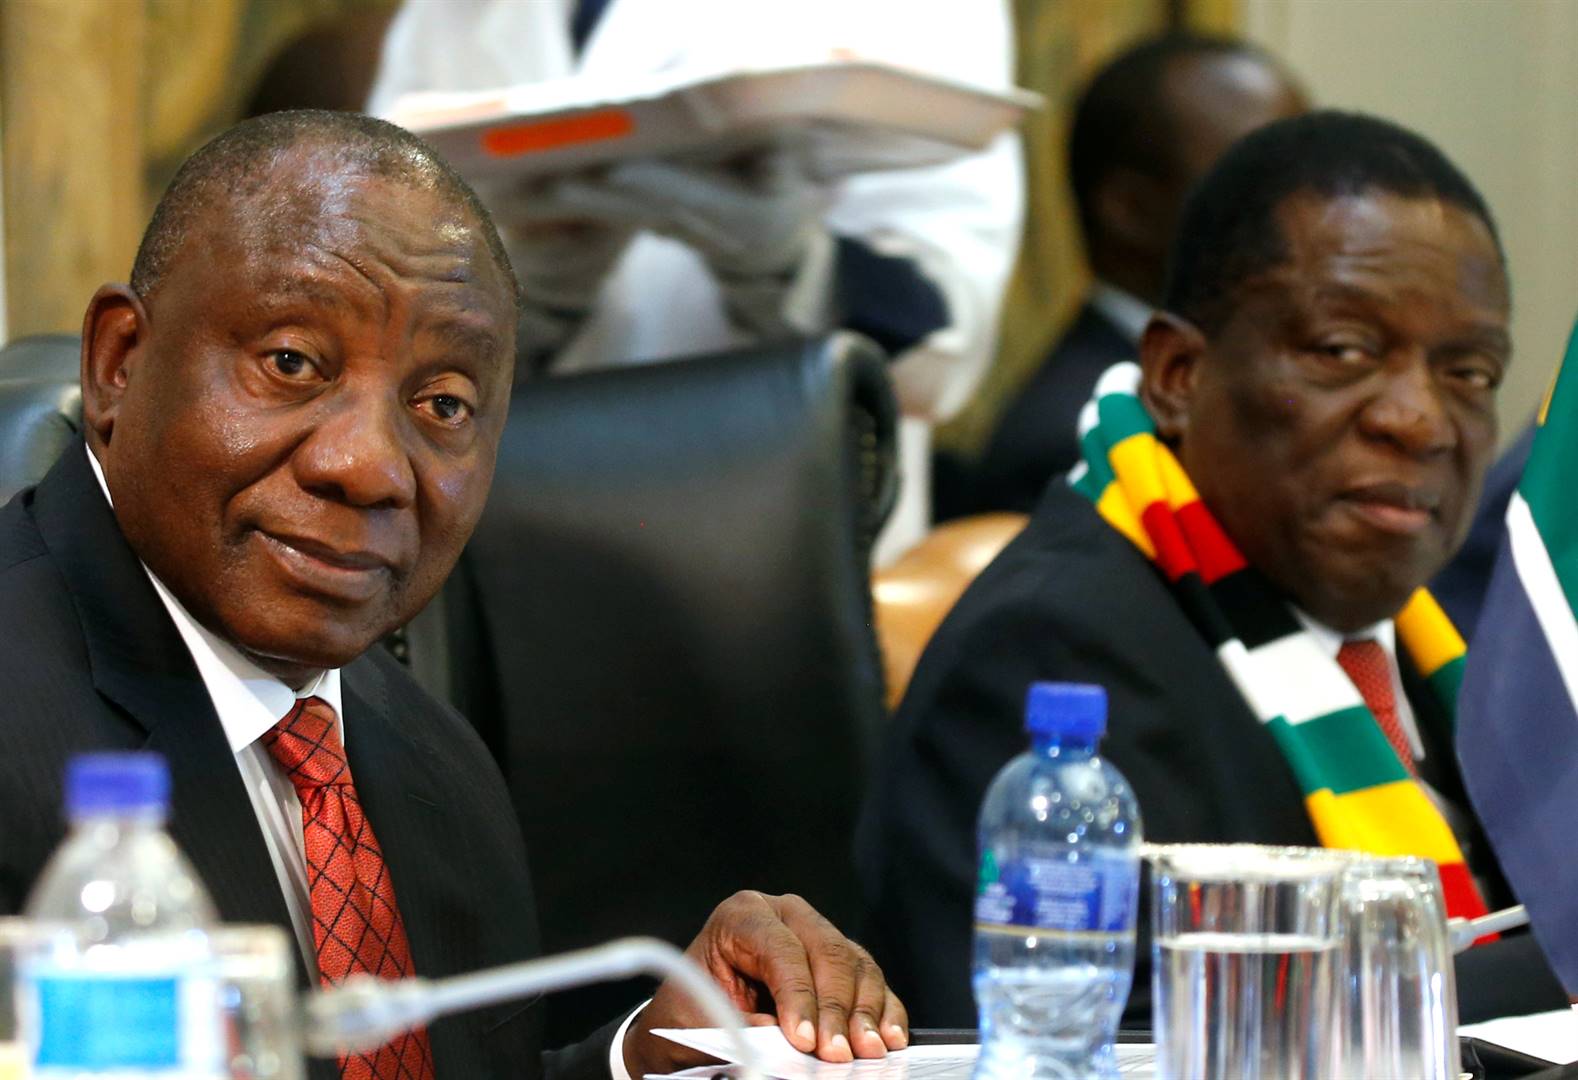 South Africa’s President Cyril Ramaphosa and Zimbabwe’s president Emmerson Mnangagwa arrive for bilateral talks in Harare, Zimbabwe, on Tuesday (March 12 2019). Picture: Philimon Bulawayo/Reuters